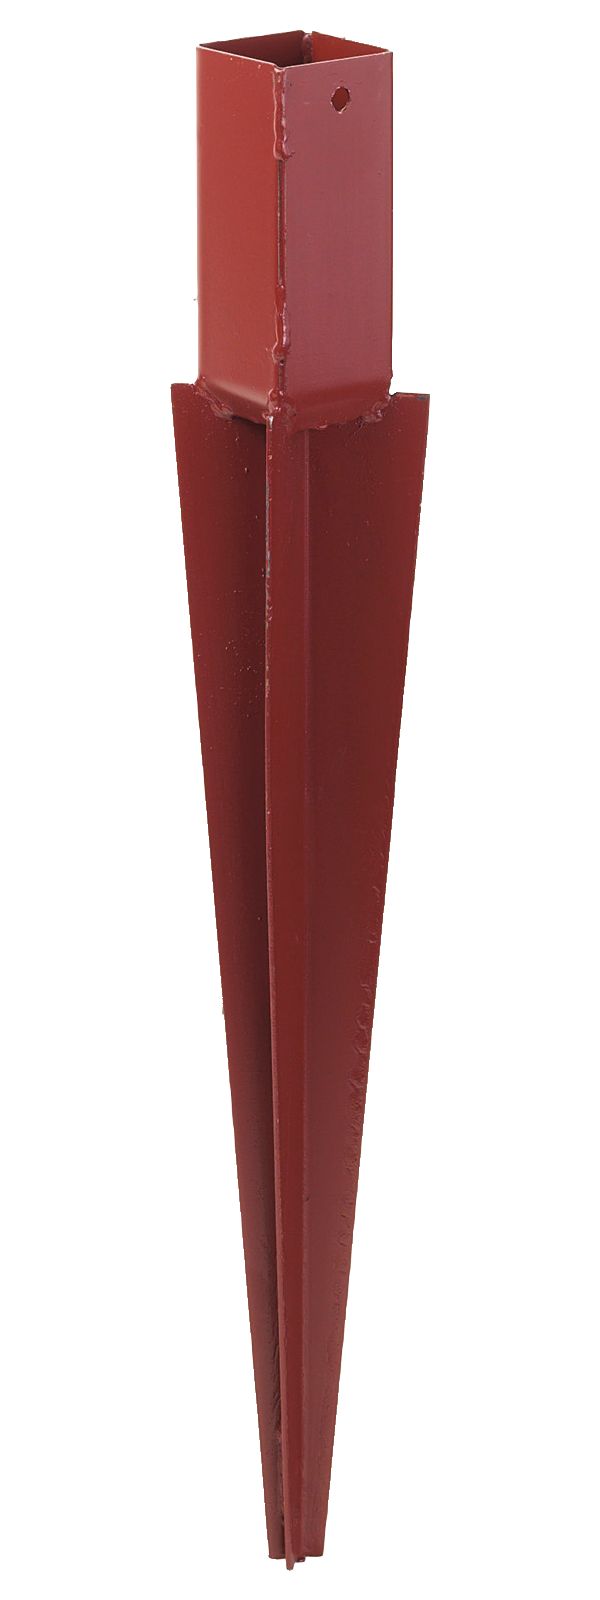 Image of Wickes 450mm Support Spike for Fence Posts - 50 x 50mm